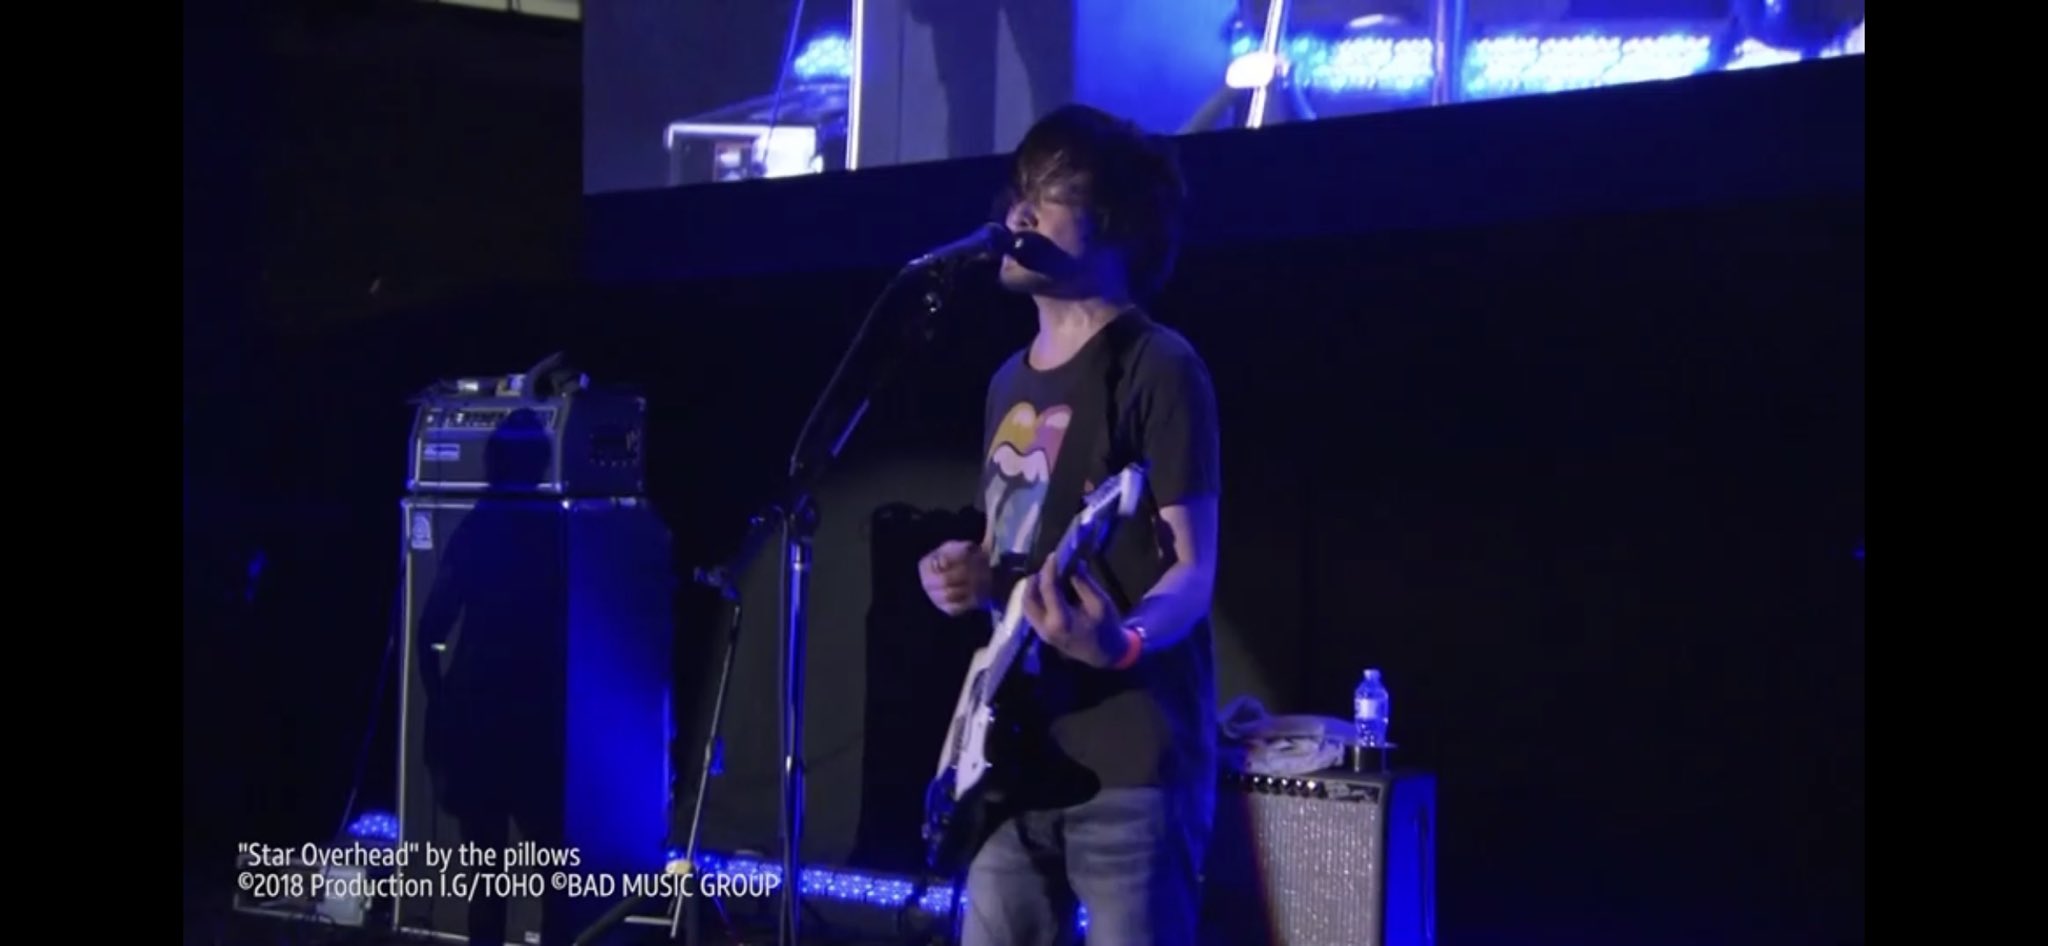 Toonami News Adultswimcon On Toonami Now The Pillows Performing Star Overhead From Flcl Alternative This Clip Is Part Of A Live Concert Recording From 18 In San Diego Which